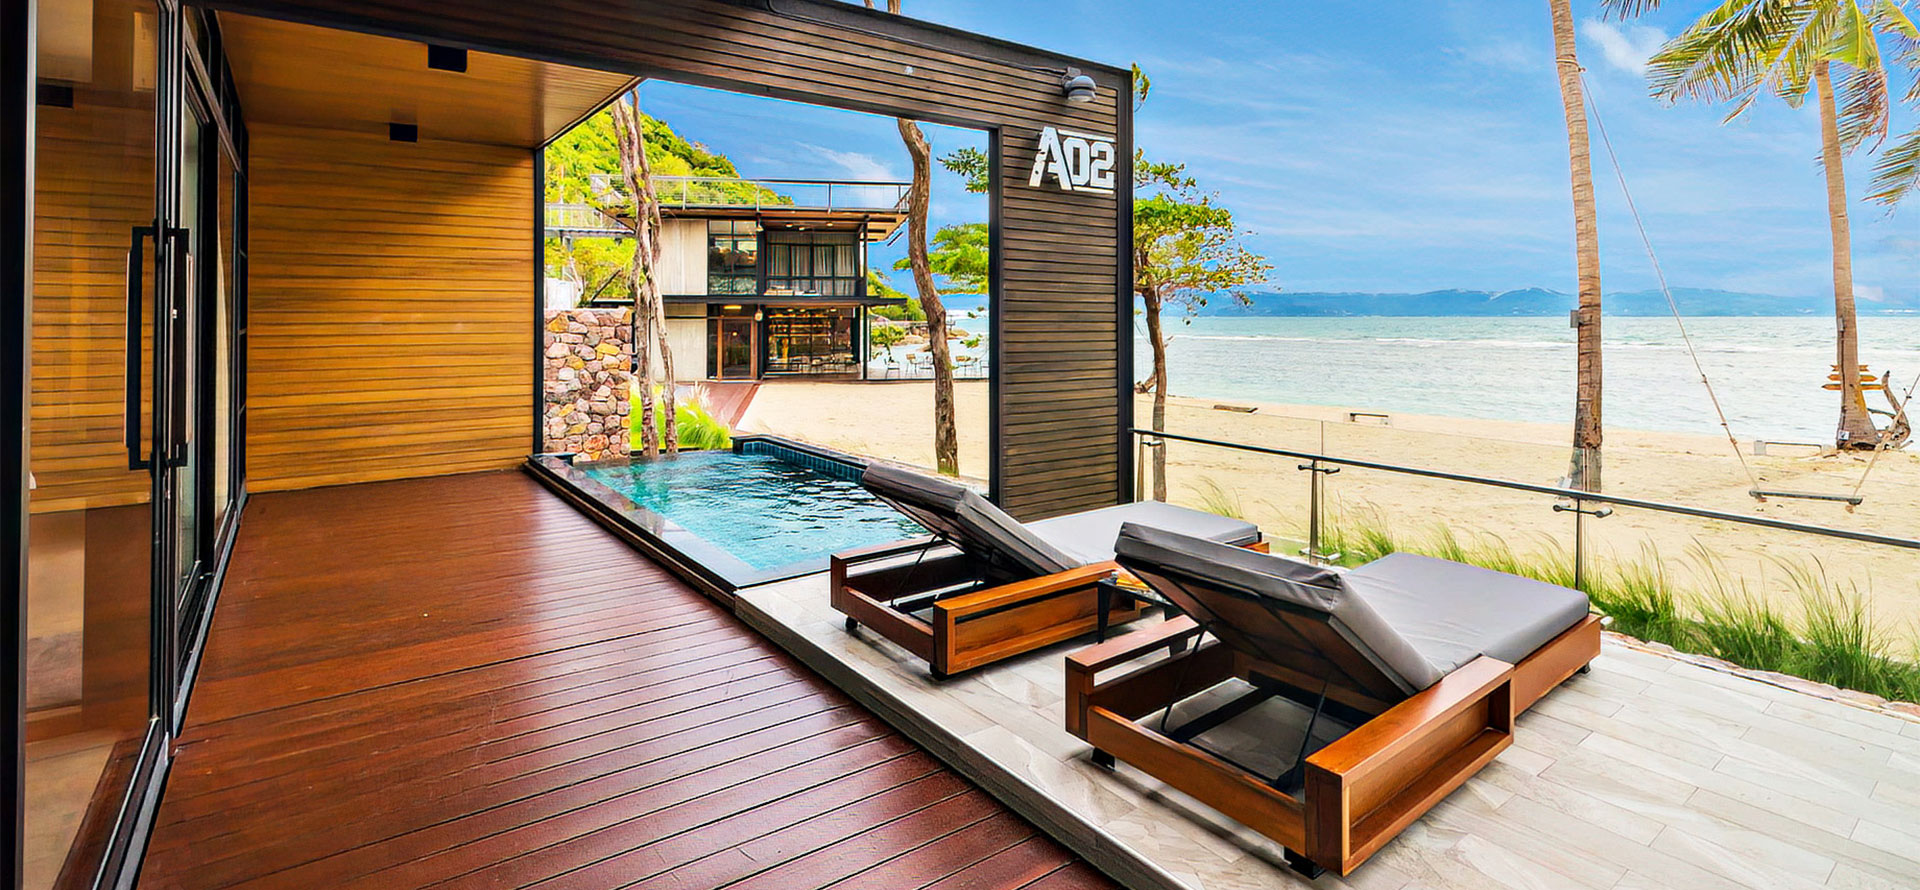 Ocean view at the Thailand all-inclusive resorts.